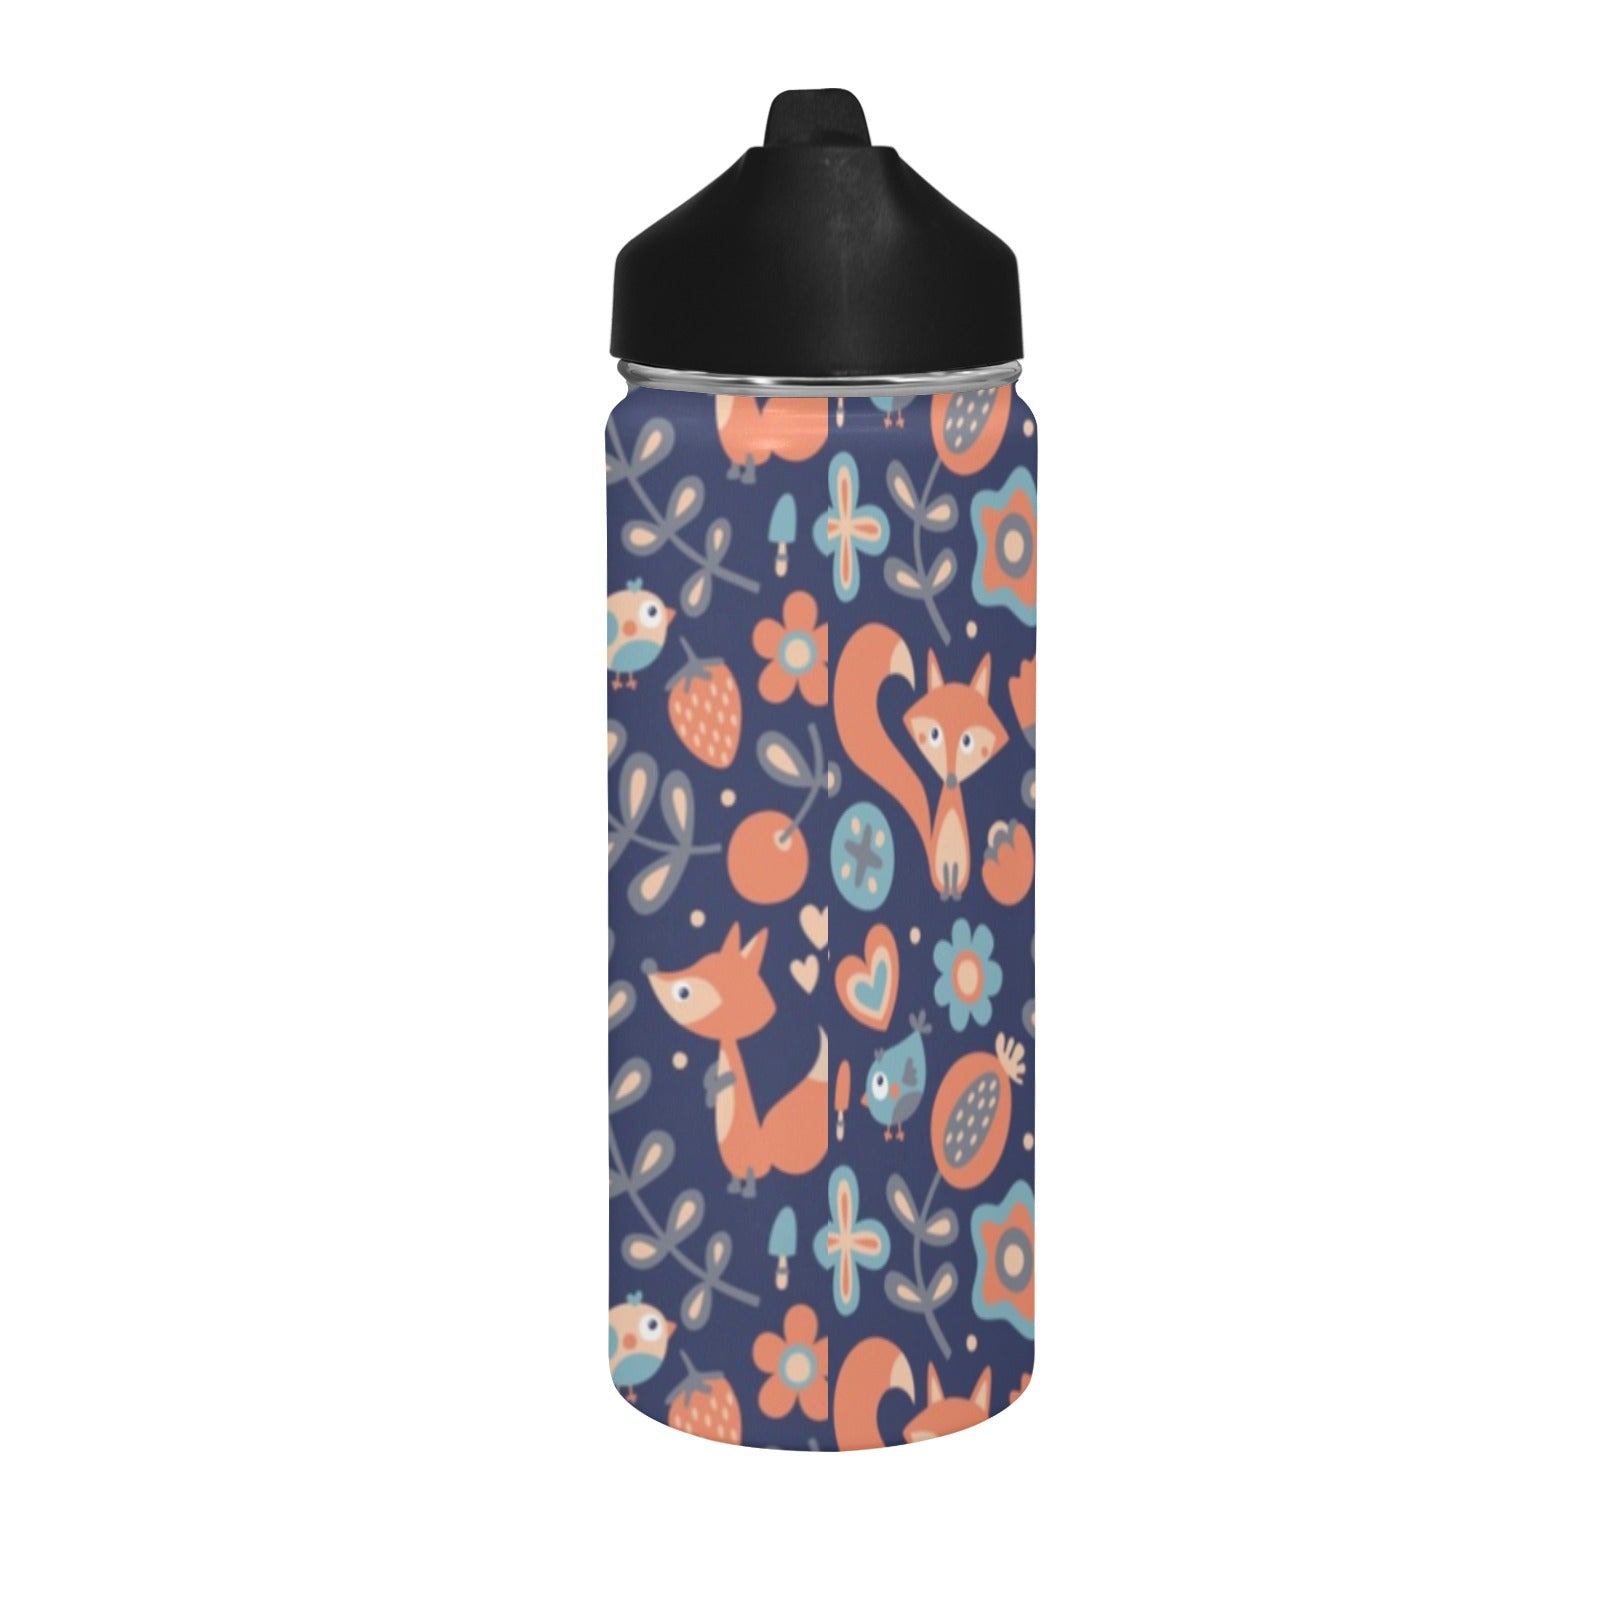 Cute Fox Insulated Water Bottle with Straw Lid (18 oz) Insulated Water Bottle with Straw Lid